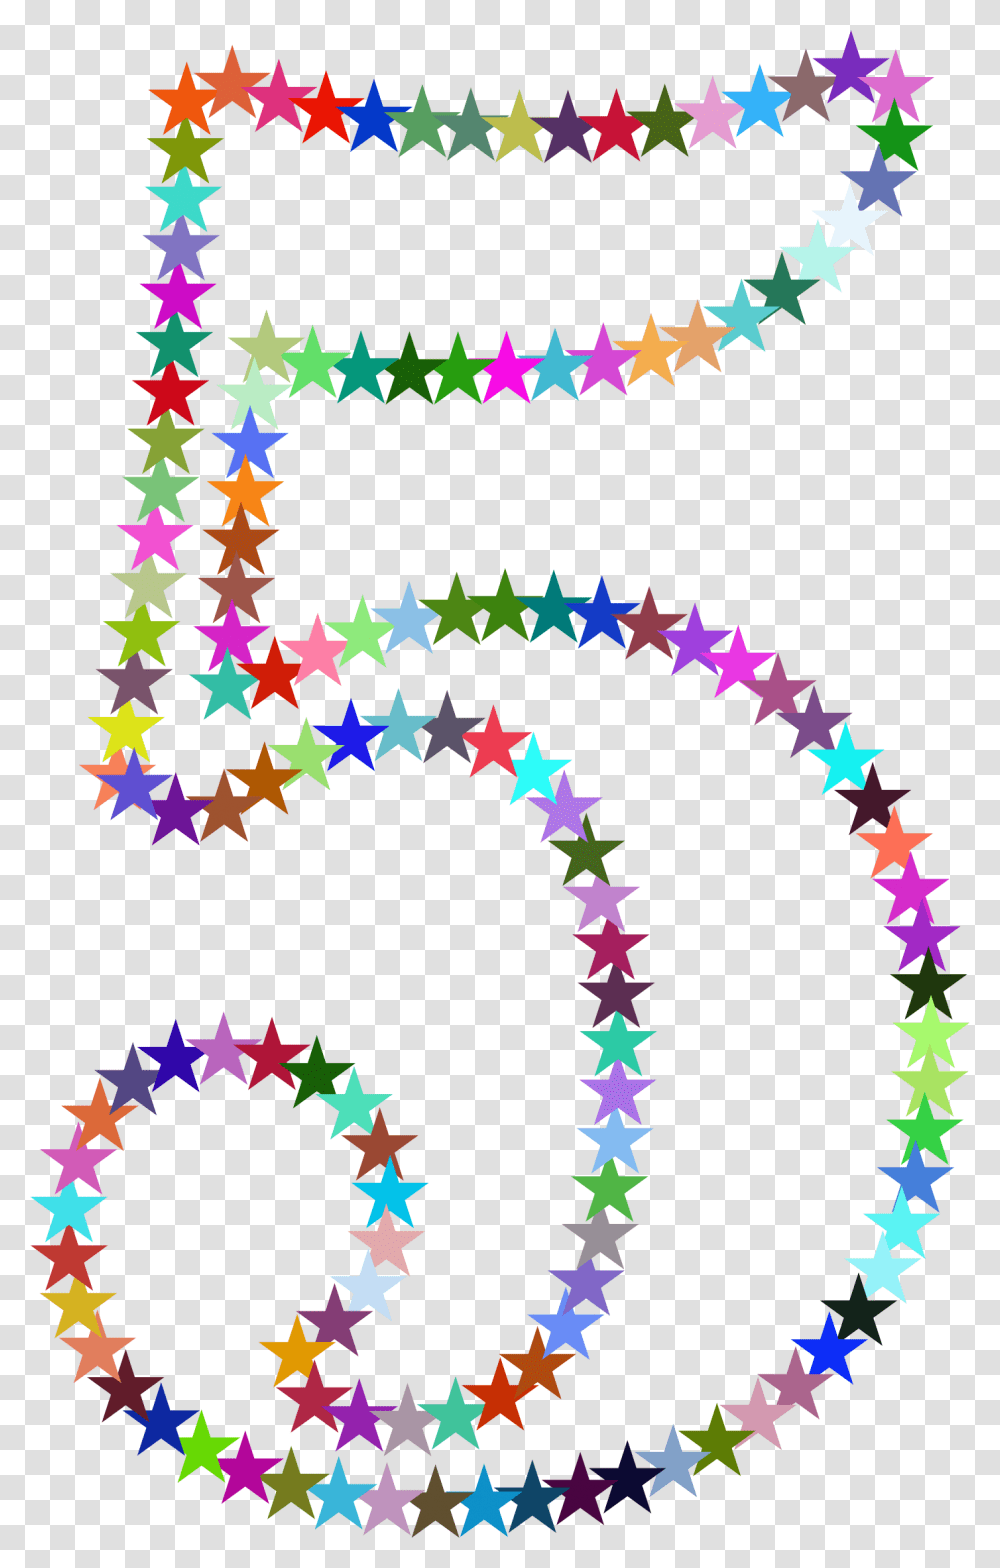 This Free Icons Design Of Five Stars Download Rainbow Star Number Clipart, Pattern, Poster Transparent Png